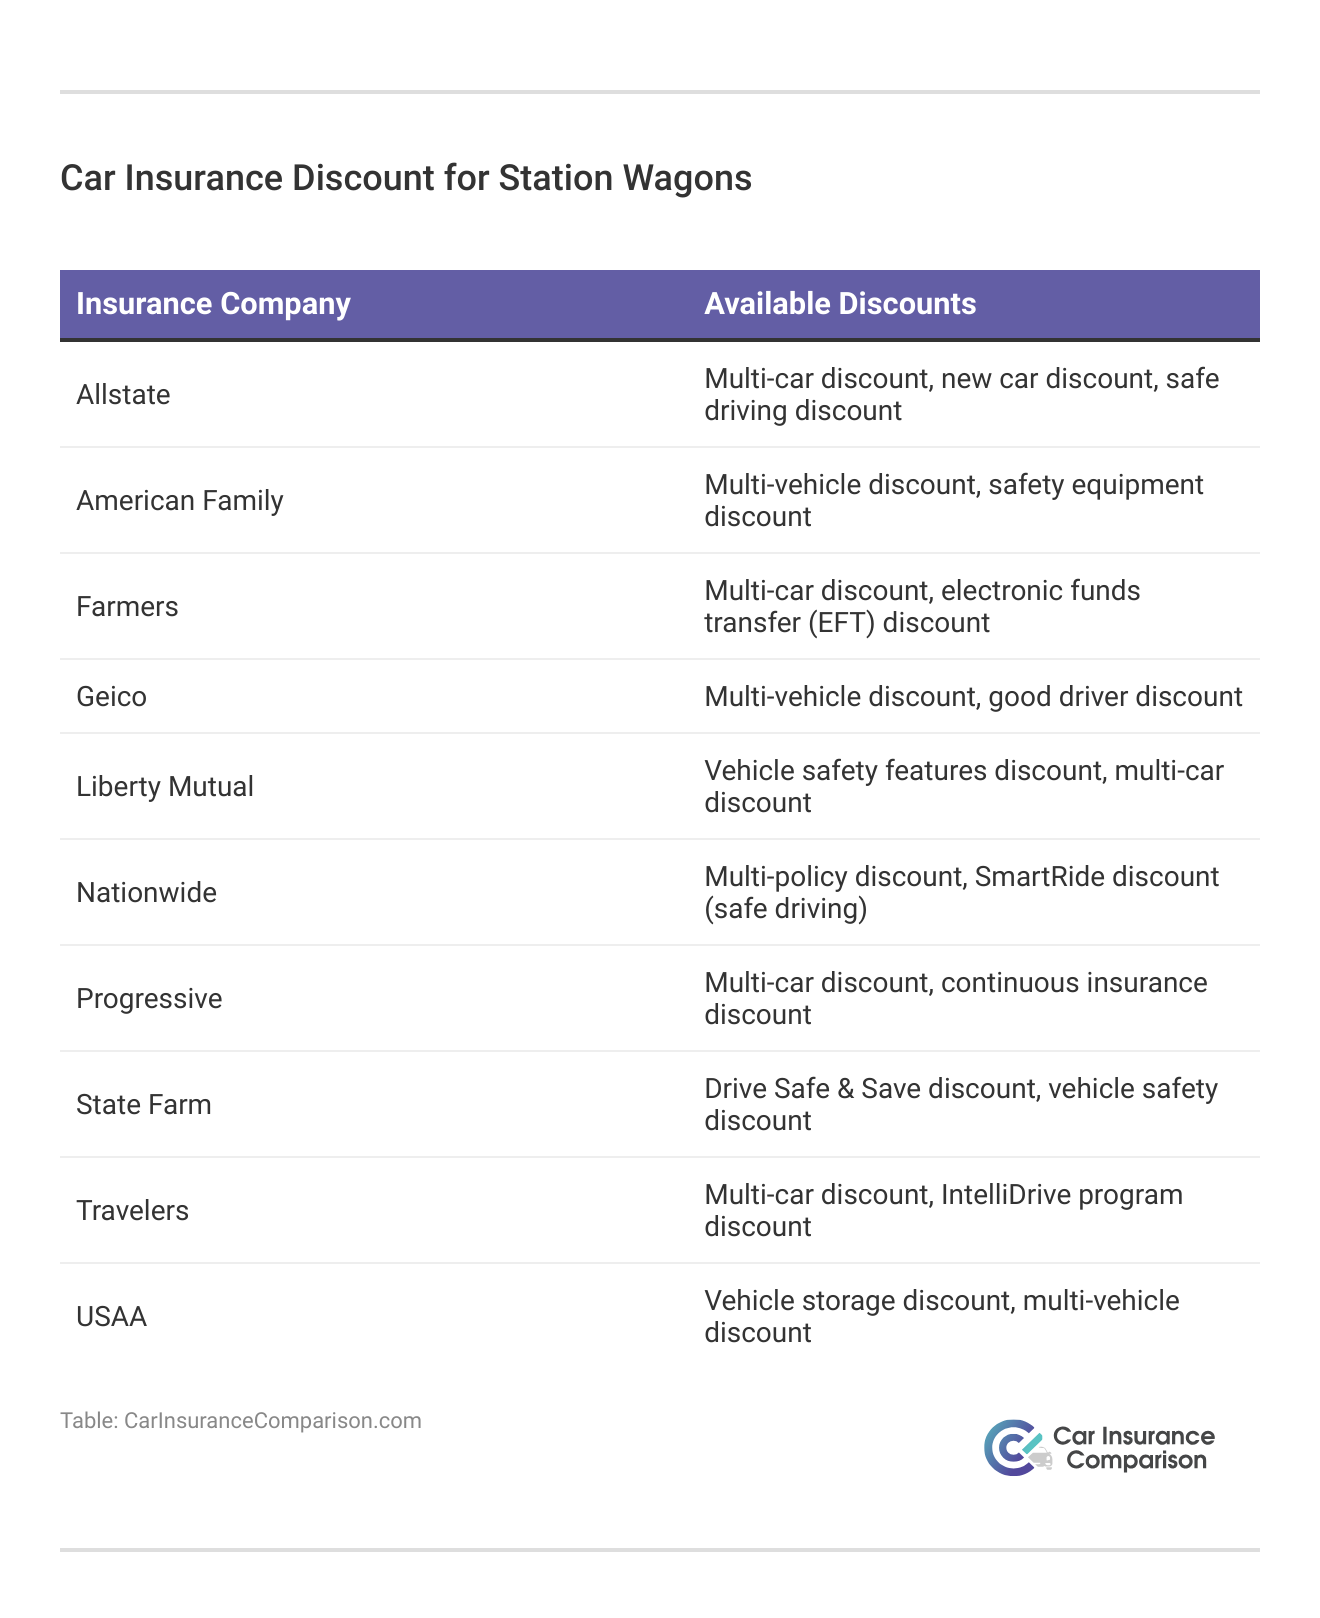 <h3>Car Insurance Discount for Station Wagons</h3>